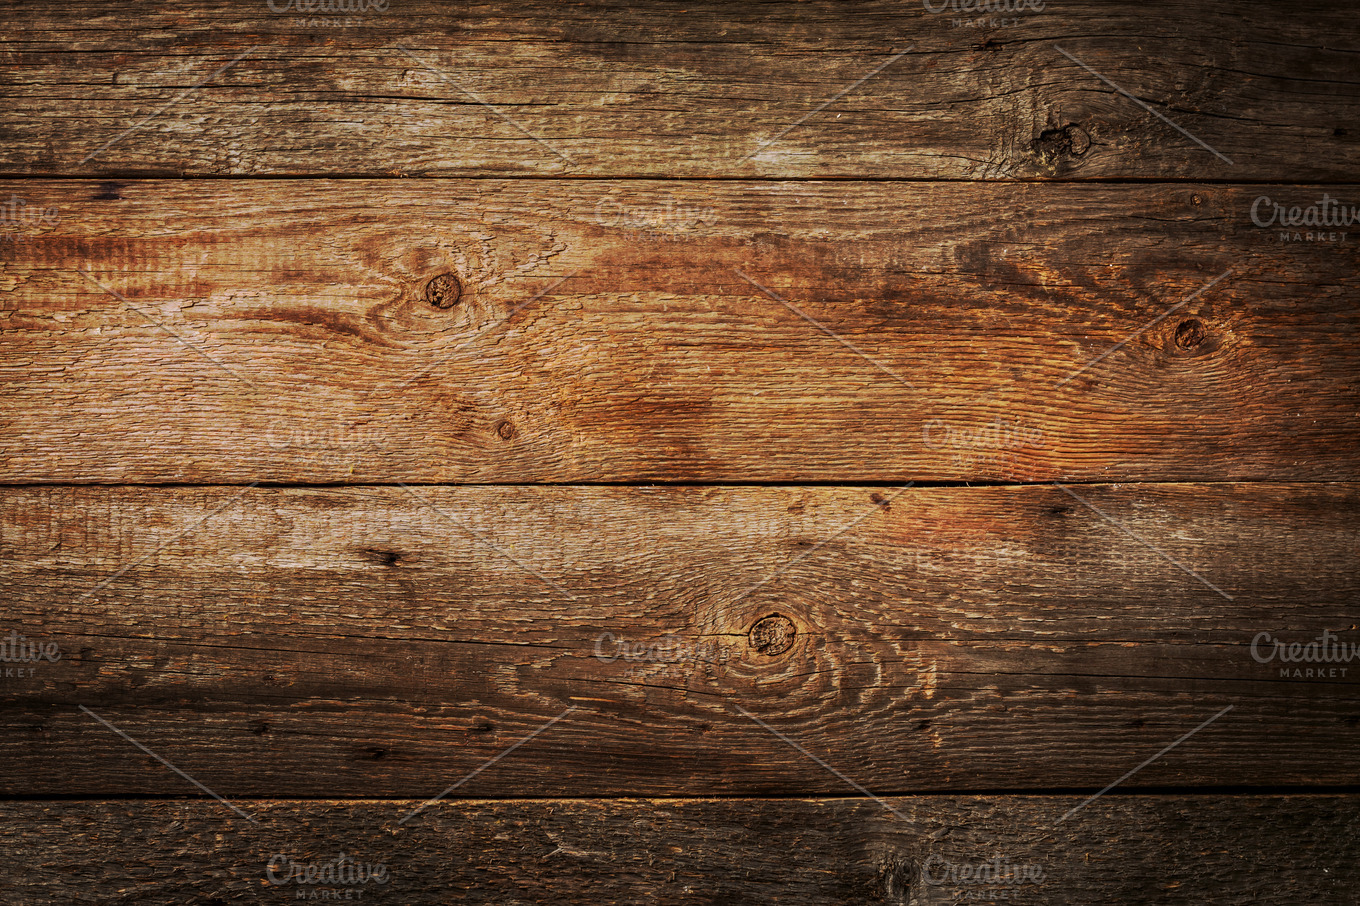 Old wooden background | High-Quality Food Images ~ Creative Market